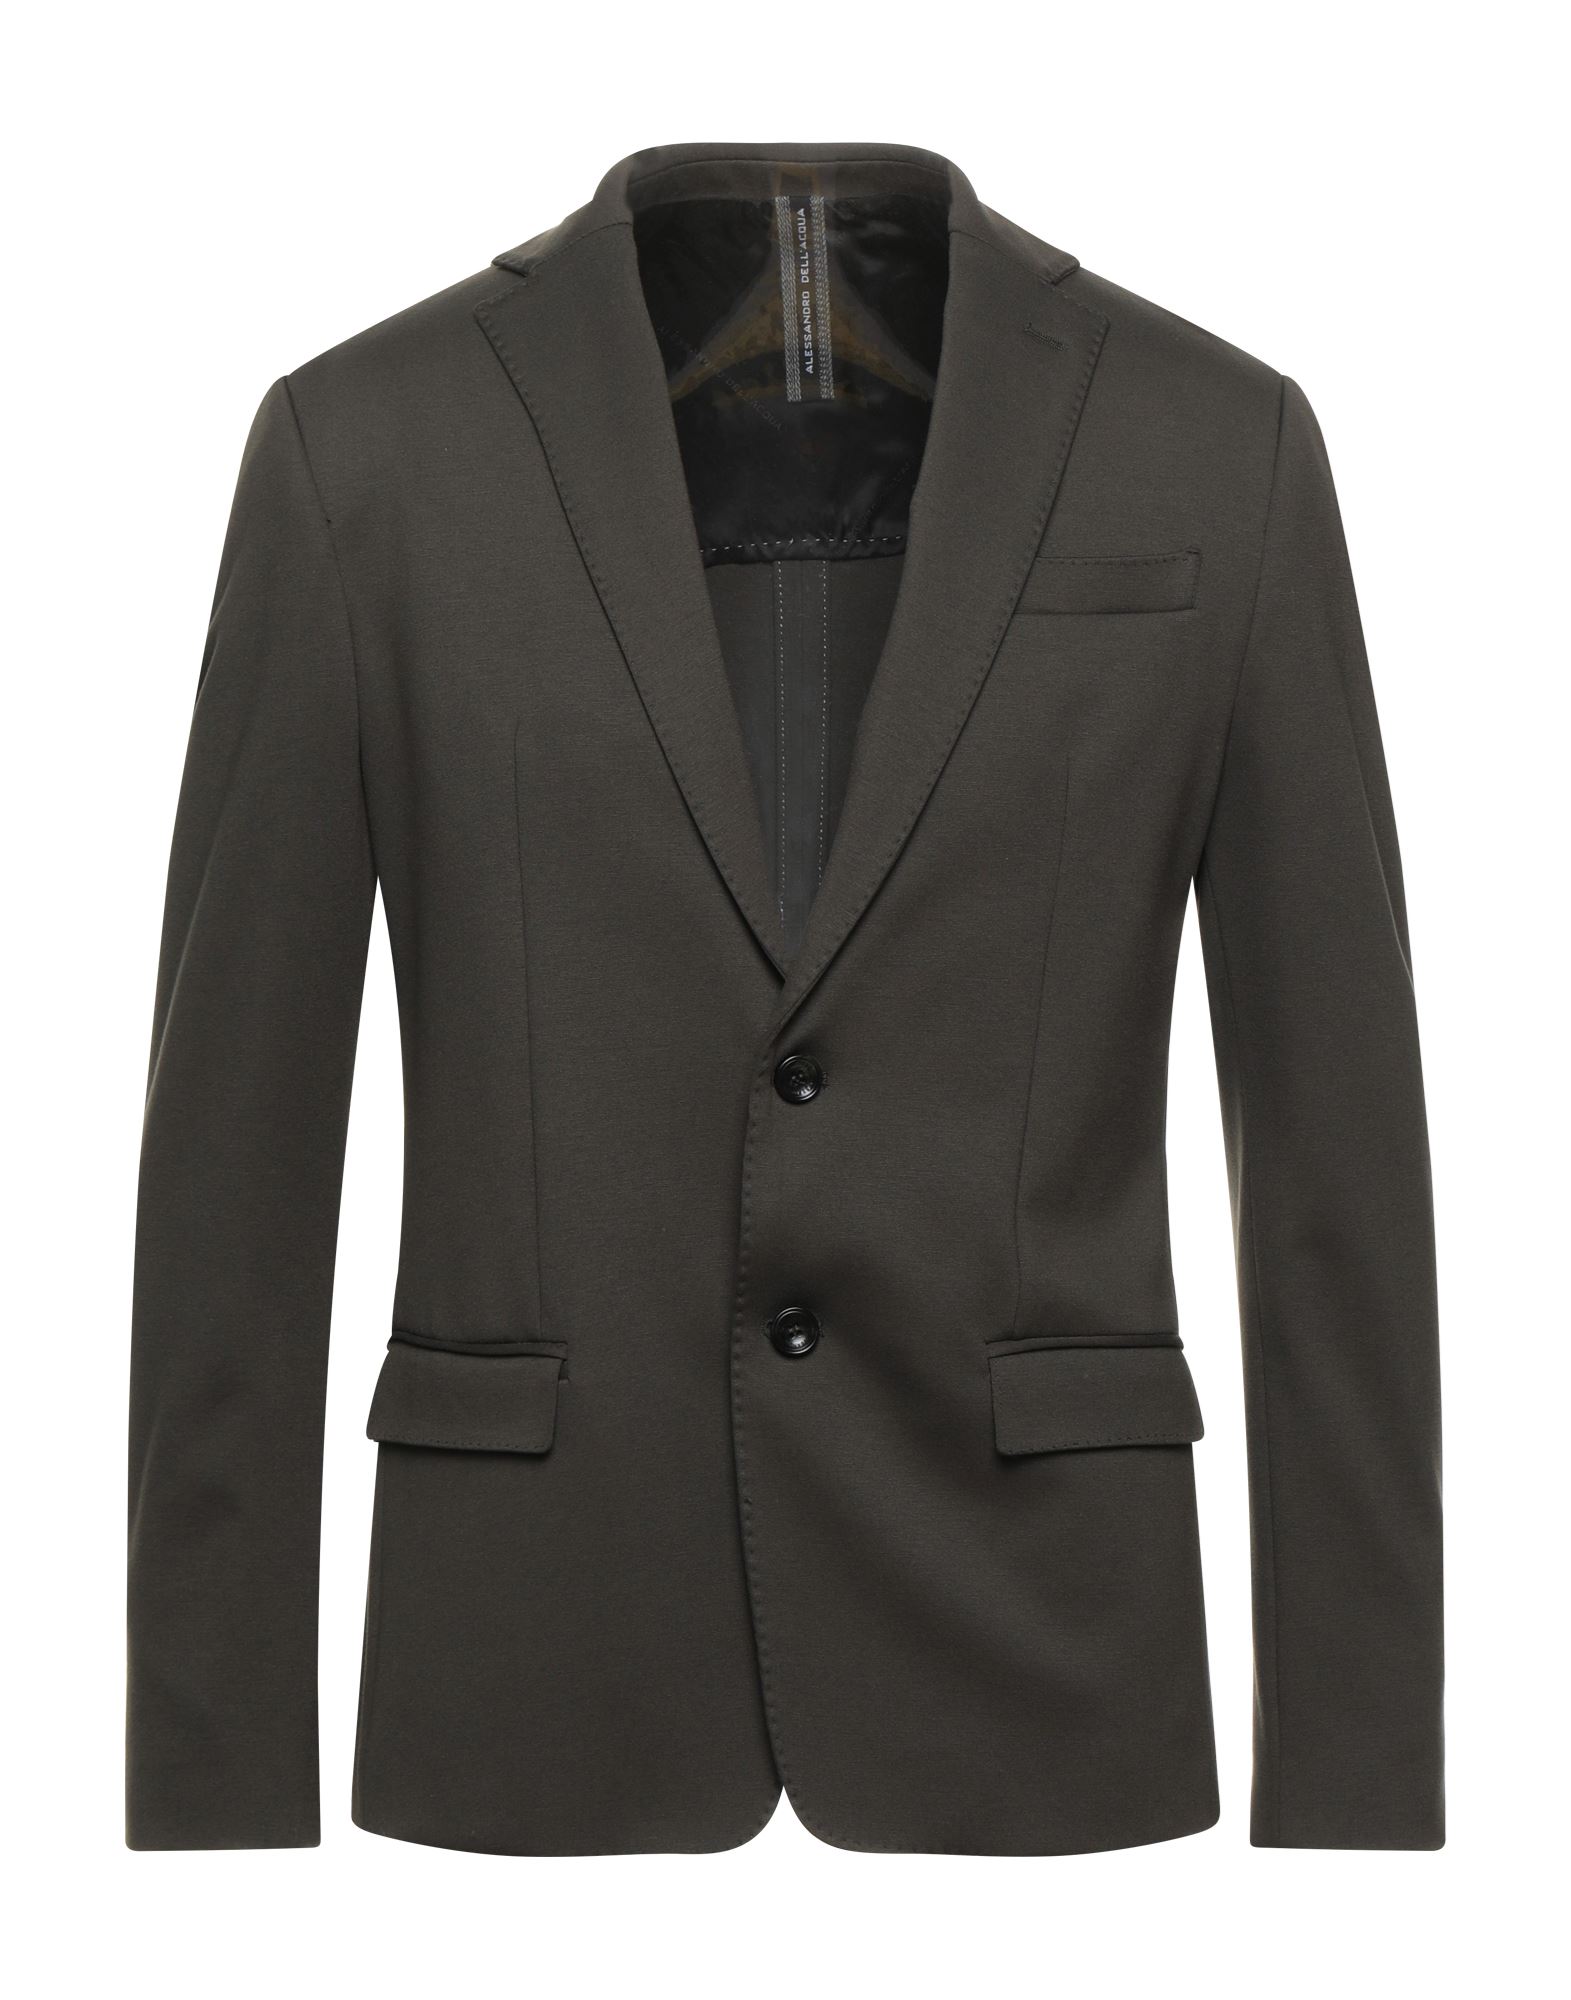 Alessandro Dell'acqua Suit Jackets In Military Green